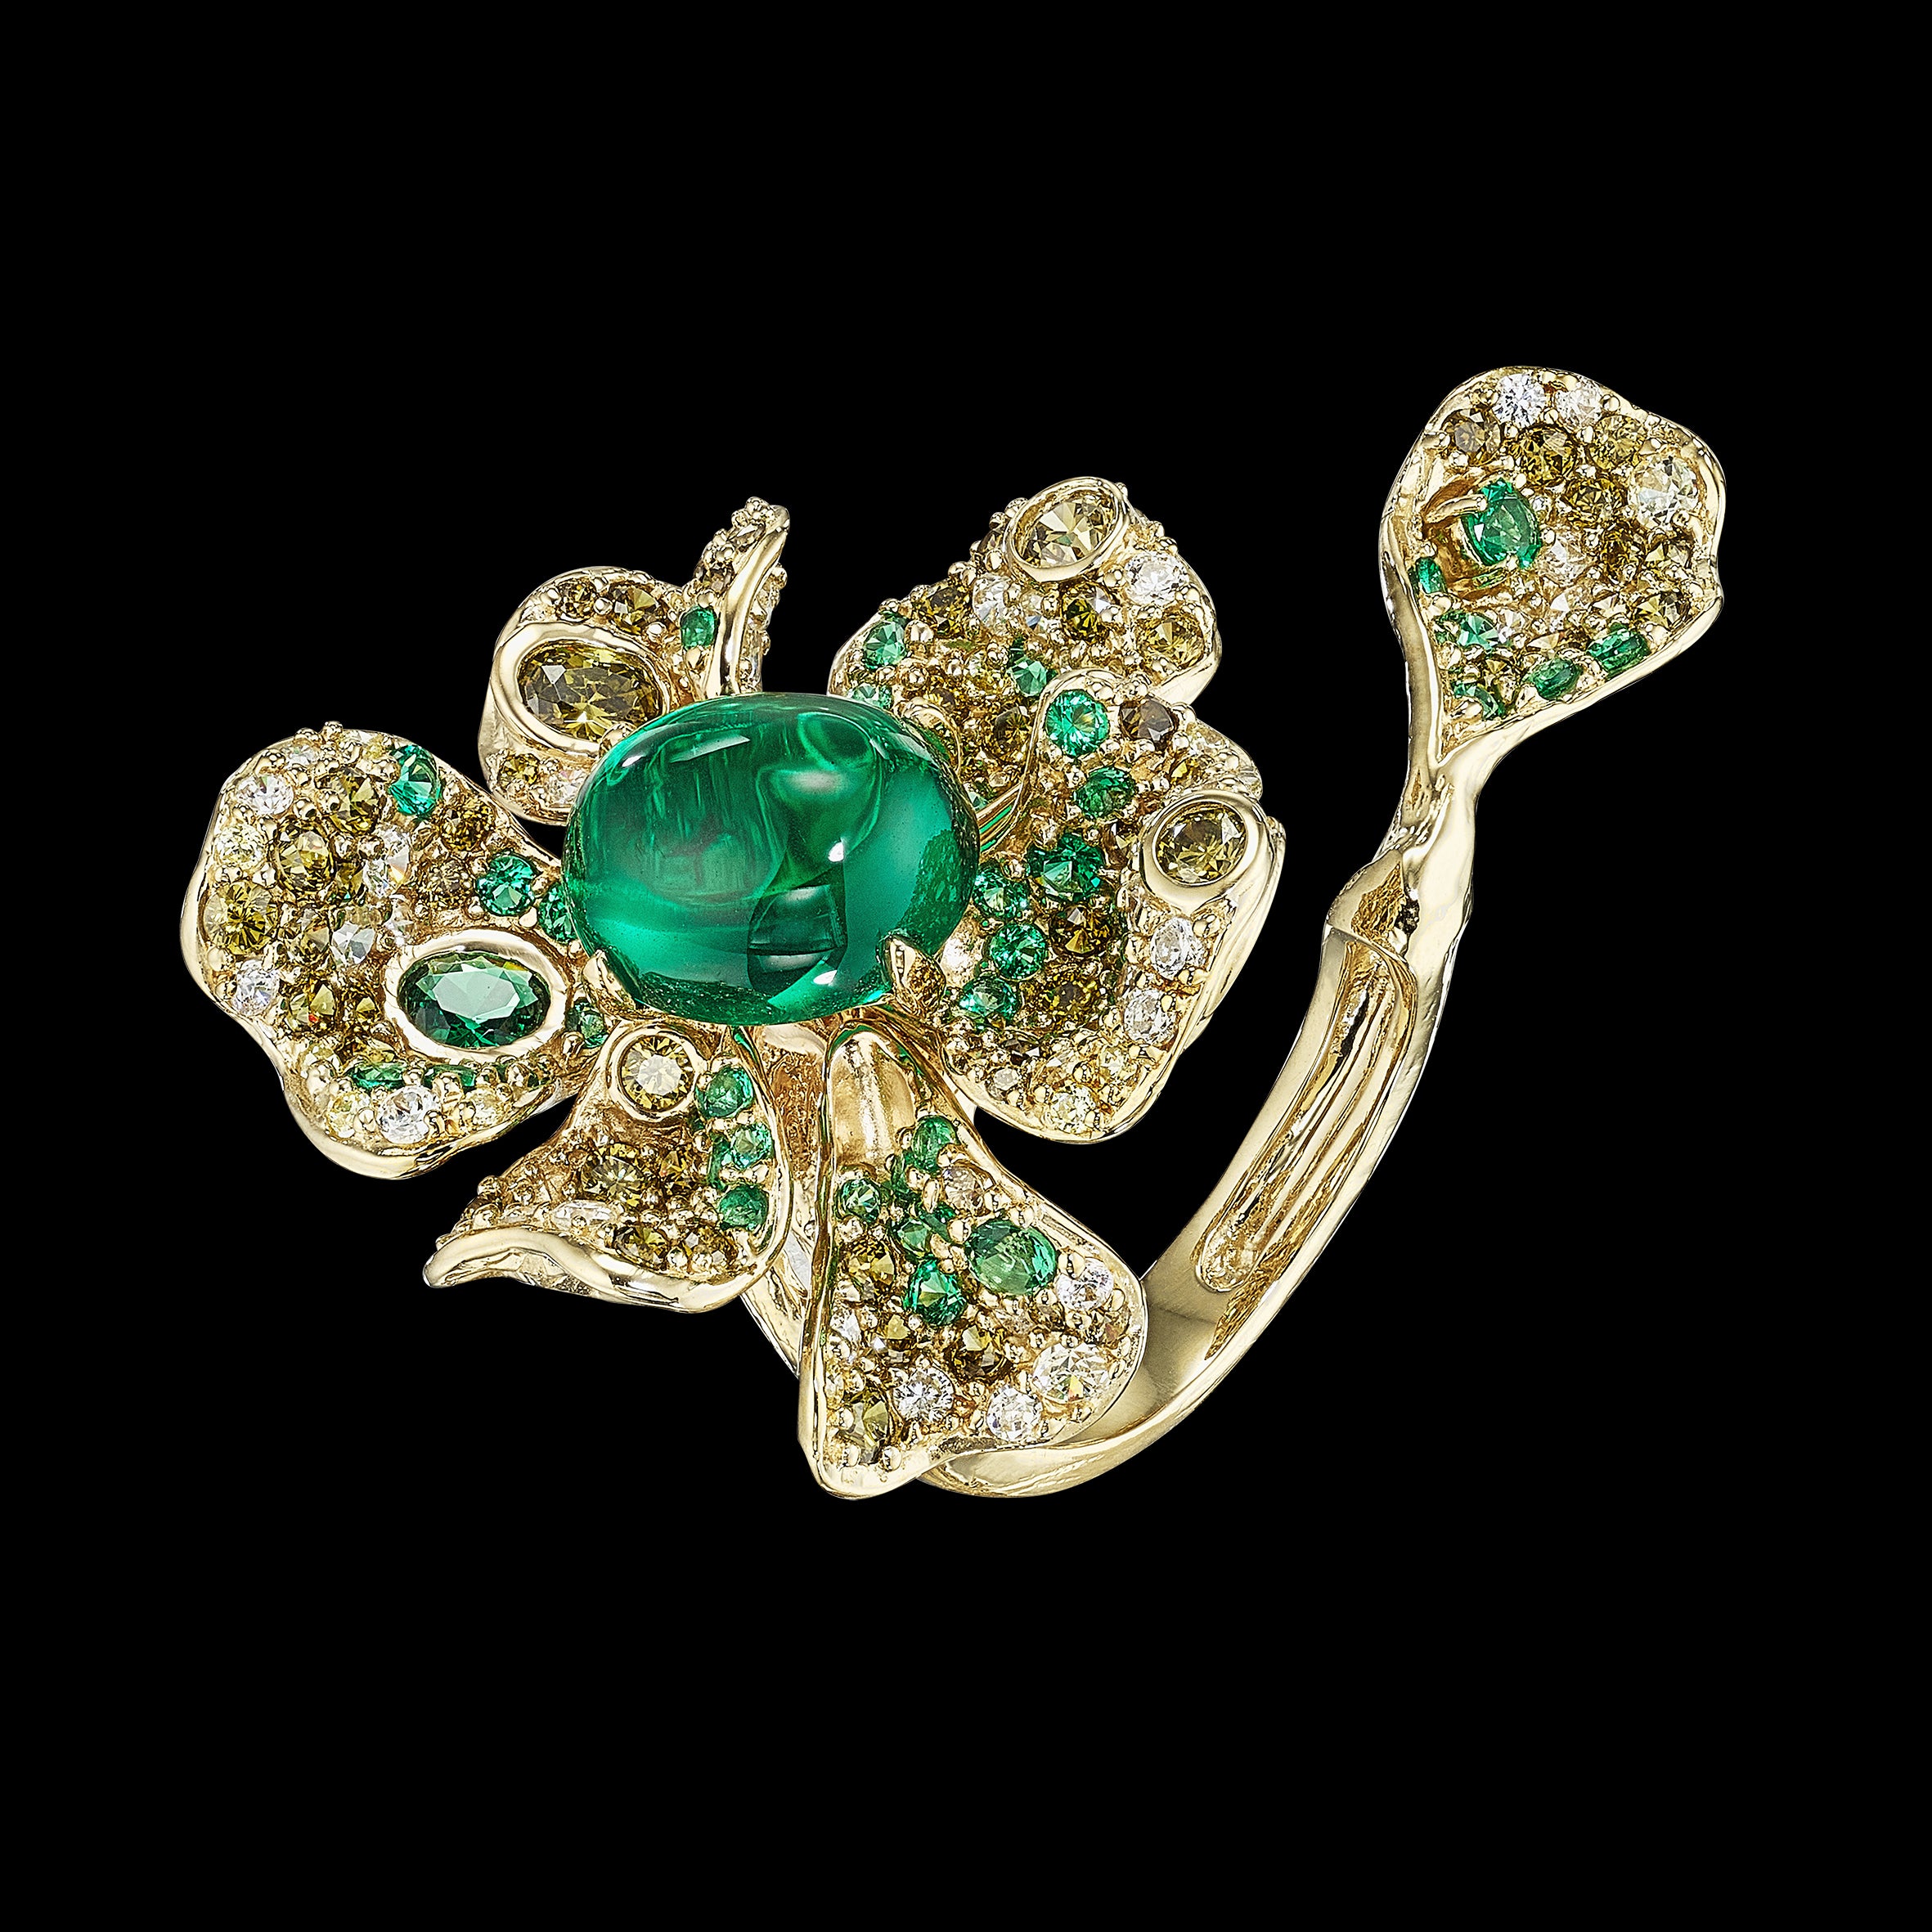 Emerald Peony Ring, Ring, Anabela Chan Joaillerie - Fine jewelry with laboratory grown and created gemstones hand-crafted in the United Kingdom. Anabela Chan Joaillerie is the first fine jewellery brand in the world to champion laboratory-grown and created gemstones with high jewellery design, artisanal craftsmanship and a focus on ethical and sustainable innovations.